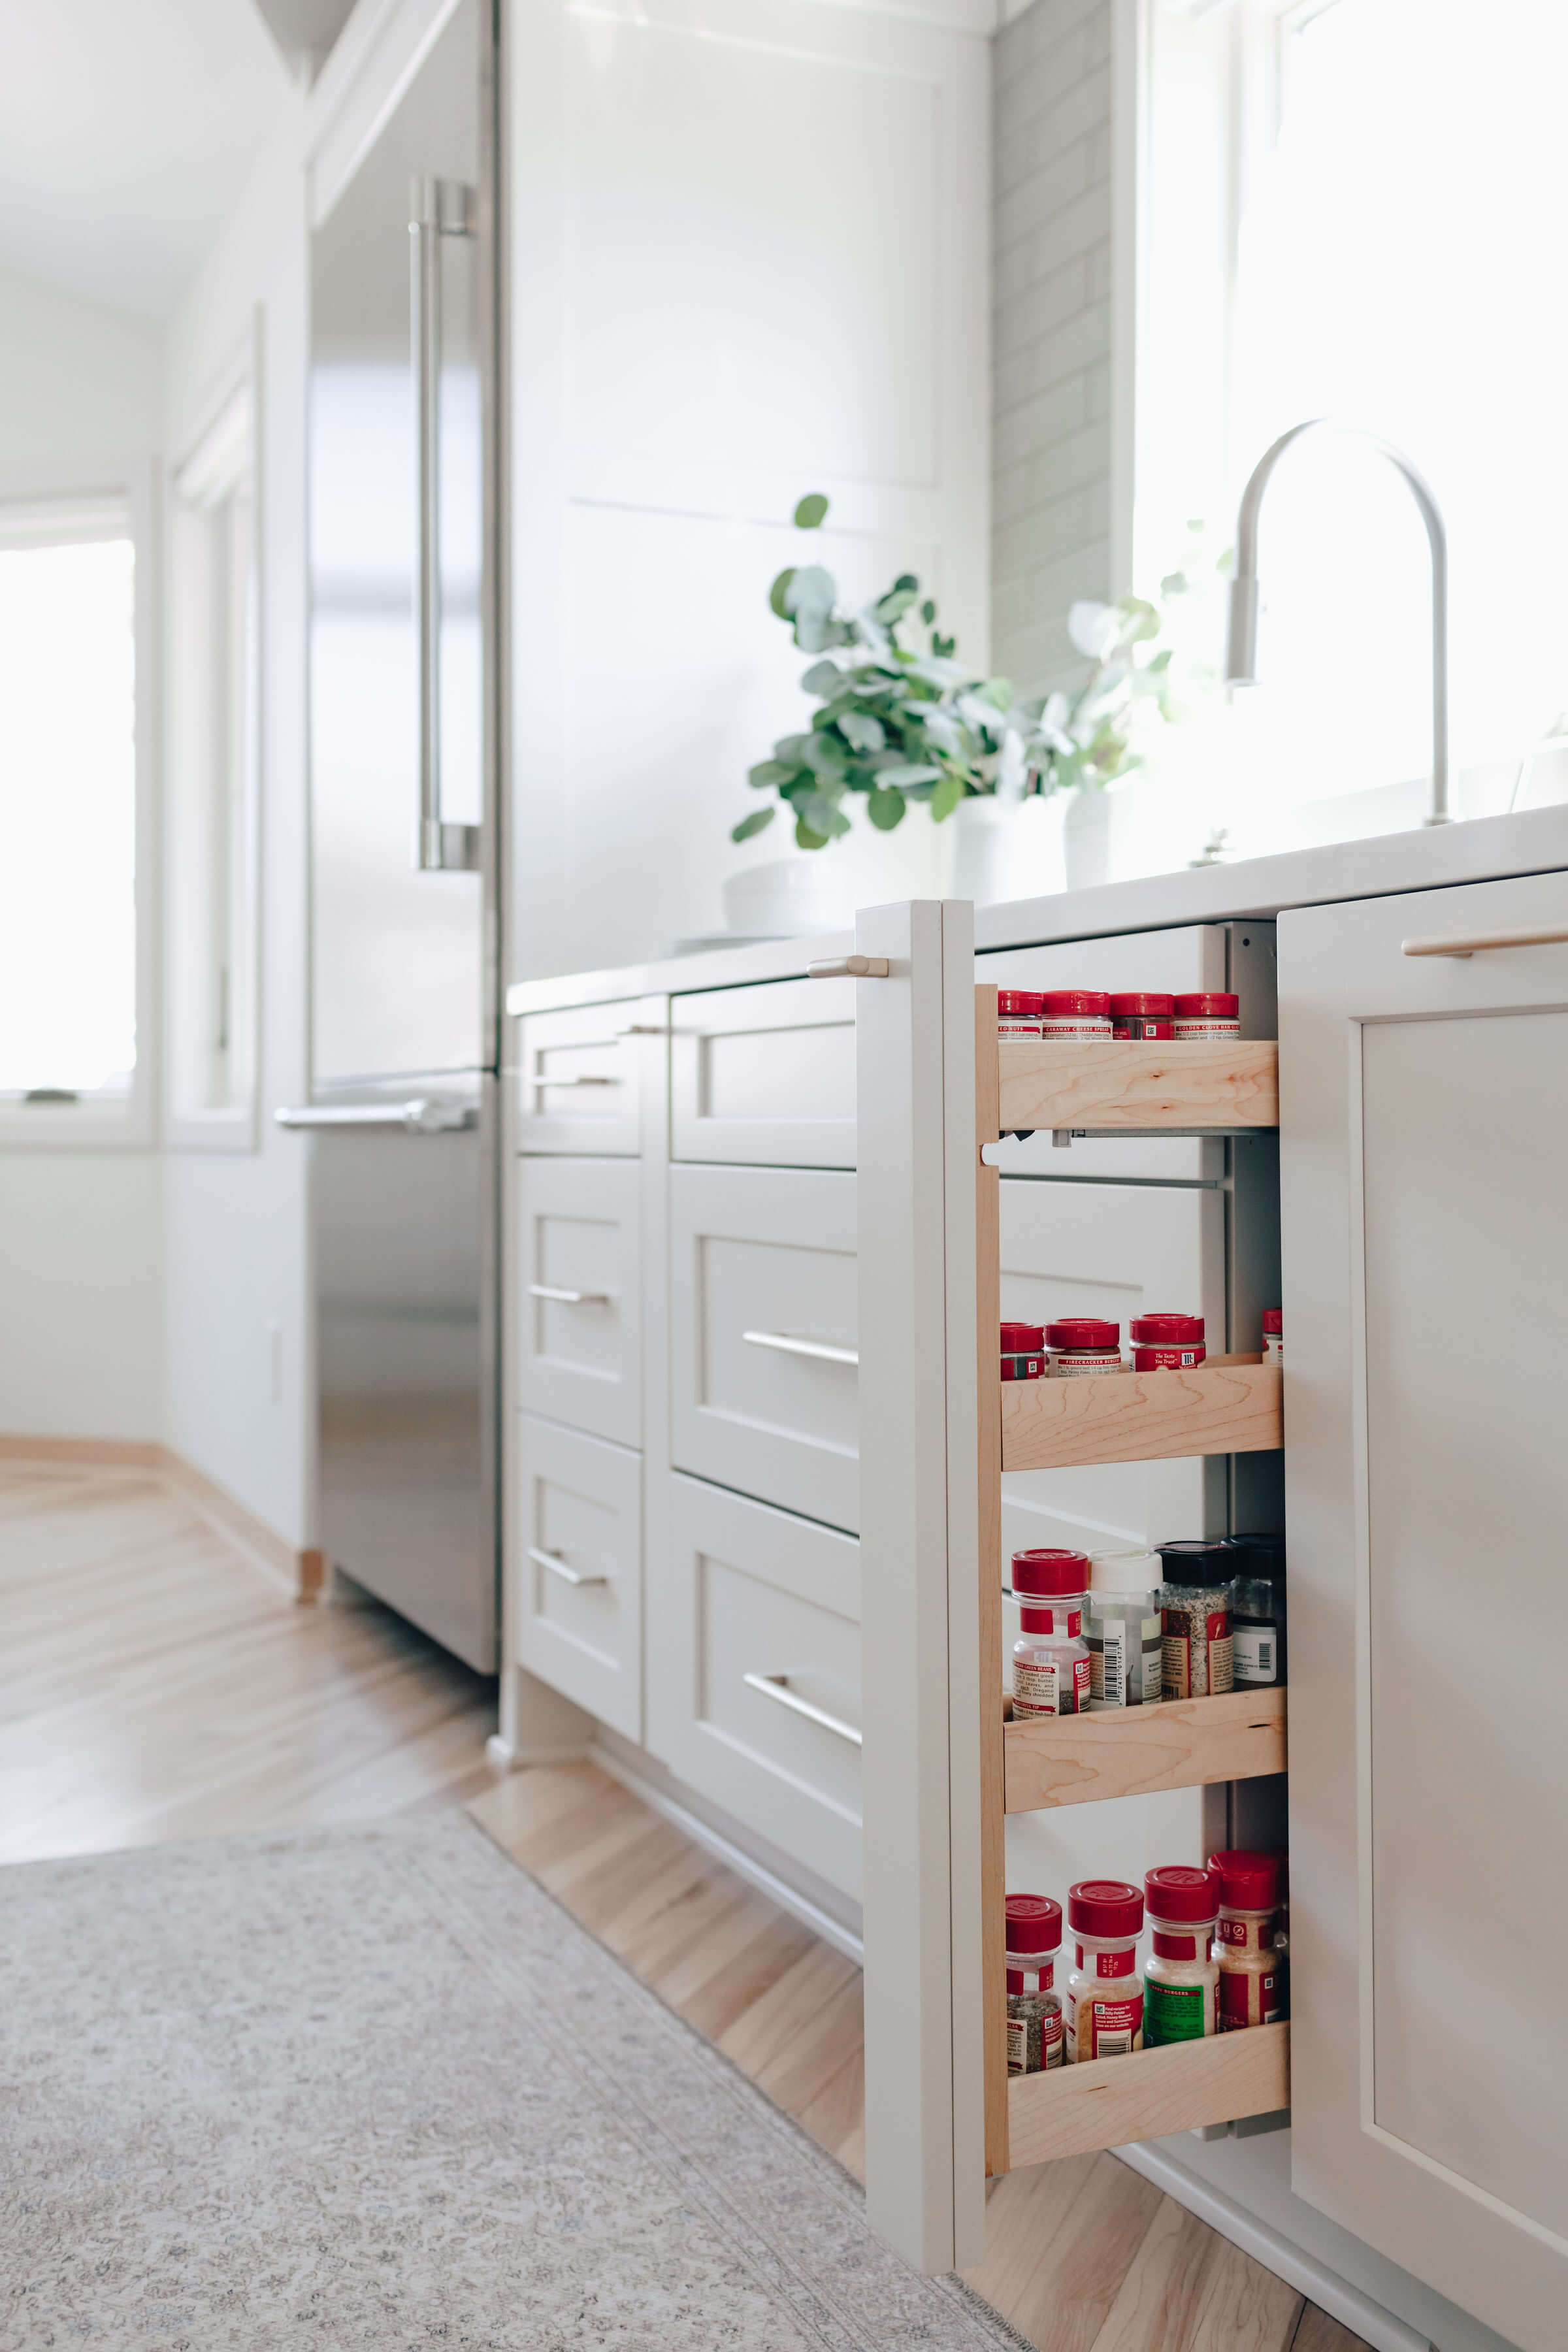 Dura Supreme's Pull-Out Spice Rack. Design by Danielle Lardani of Studio M Kitchen & Bath, Twin Cities, MN. Photo by Chelsie Lopez Production & Marketing.